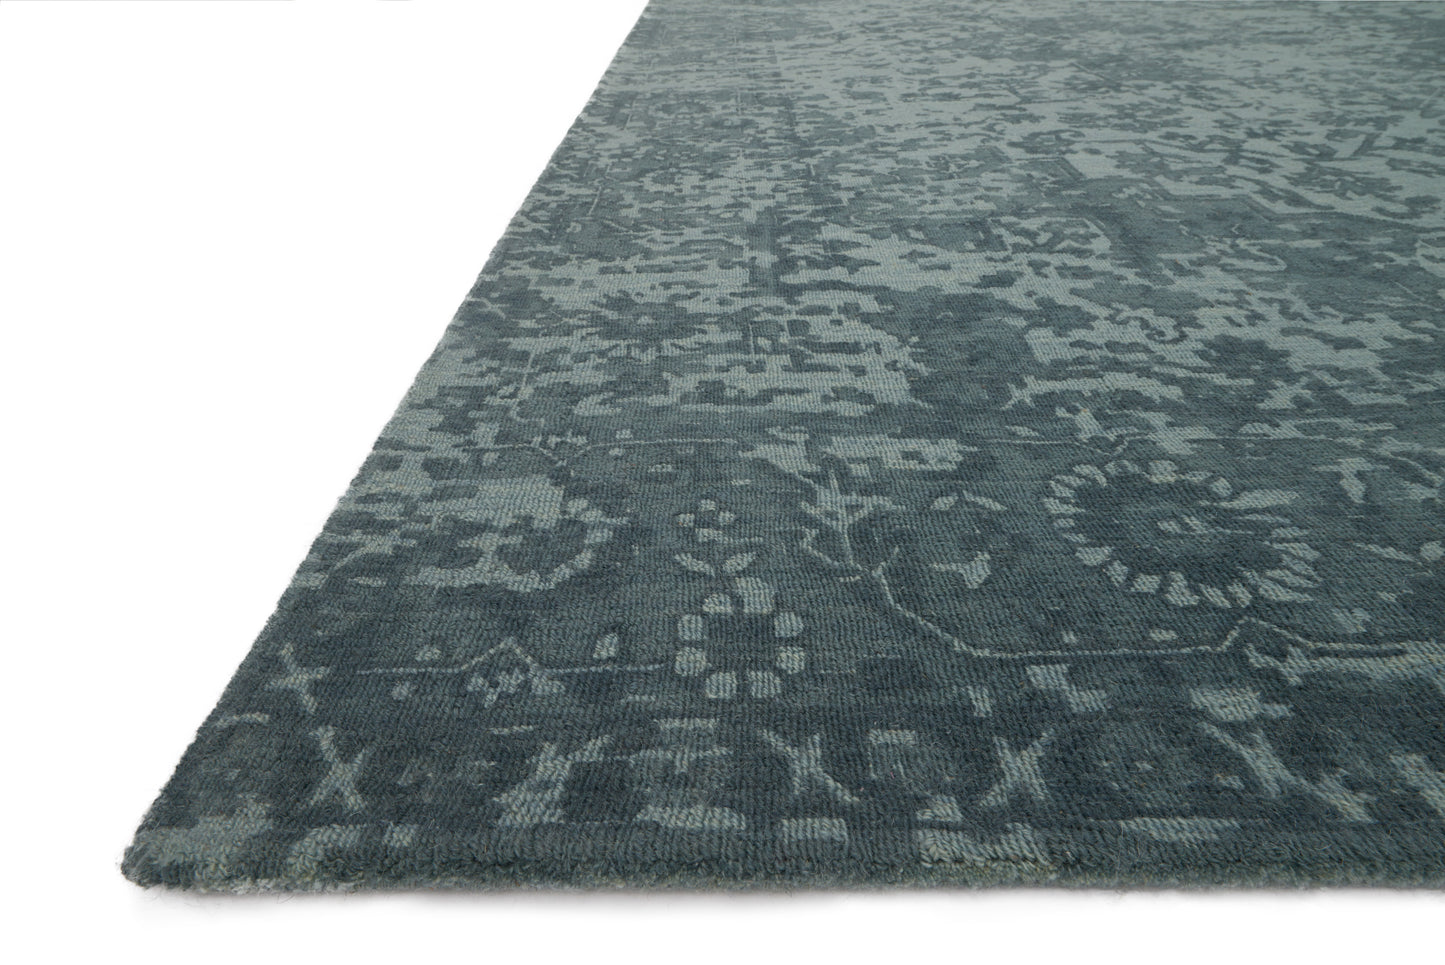 Lily Park ED Wool Indoor Area Rug from Magnolia Home by Joanna Gaines x Loloi